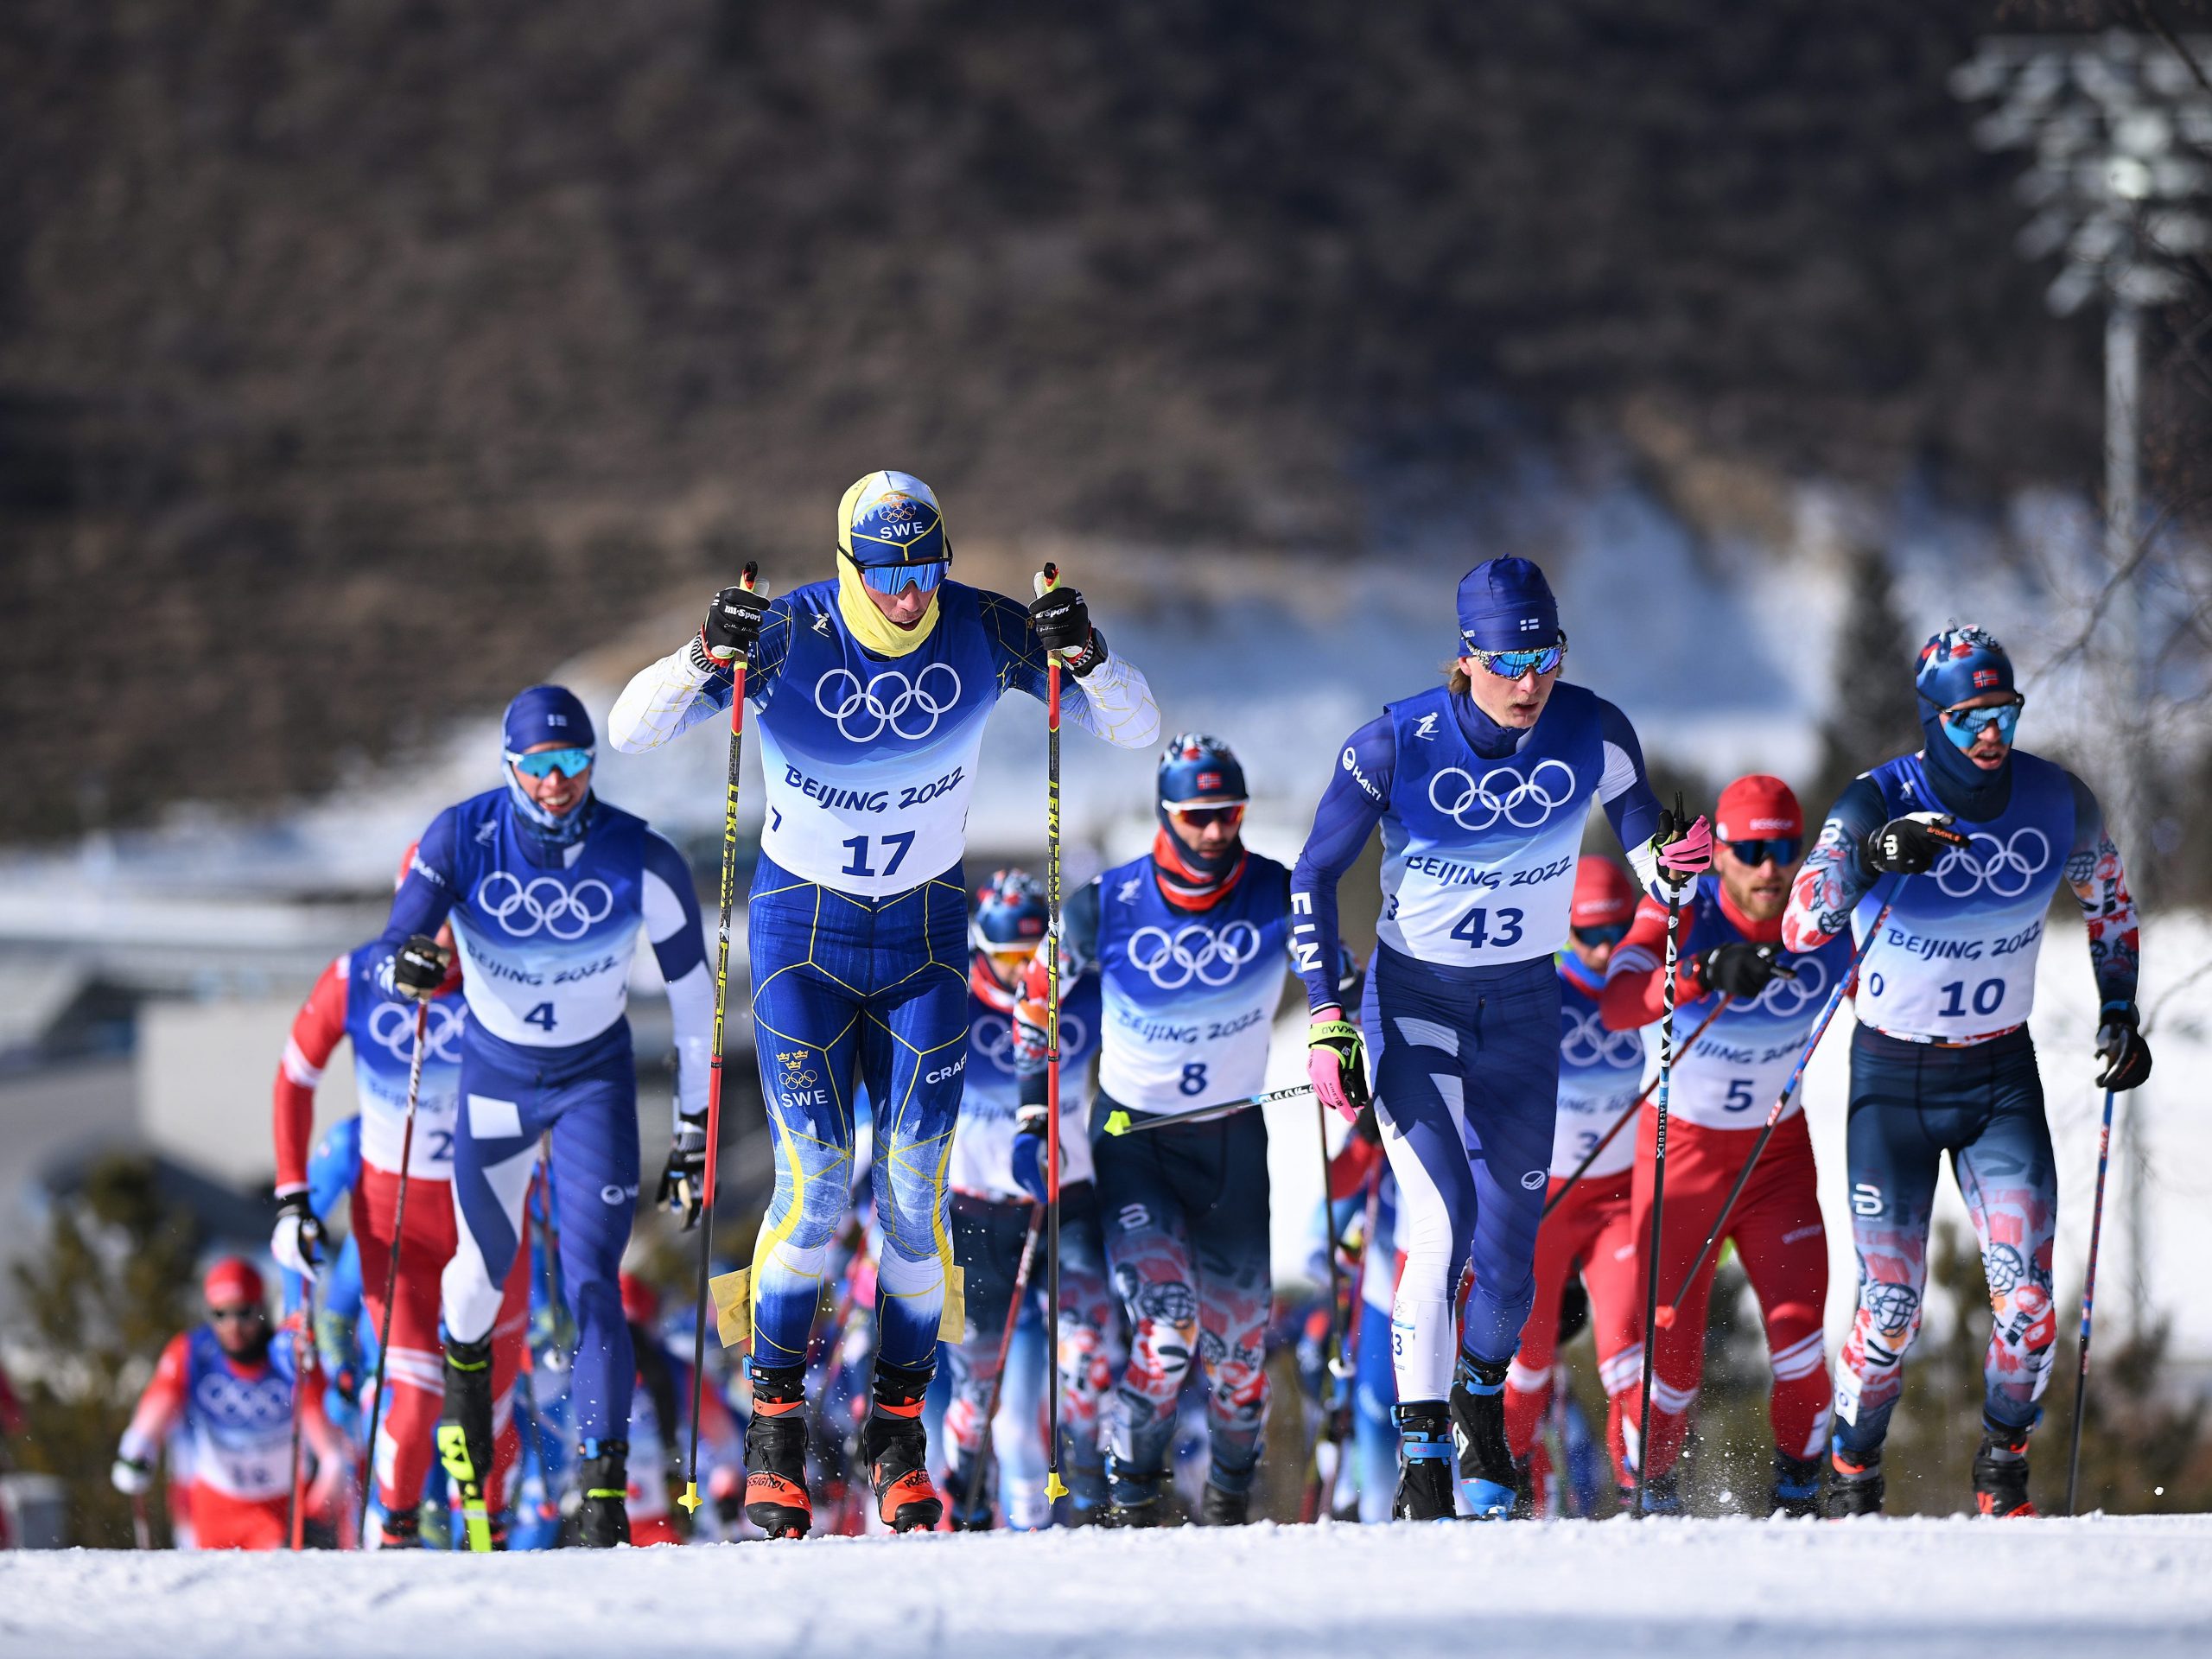 Men's Cross-Country Skiing 15km + 15km Skiathlon on Day 2 of the Beijing 2022 Winter Olympic Games at The National Cross-Country Skiing.